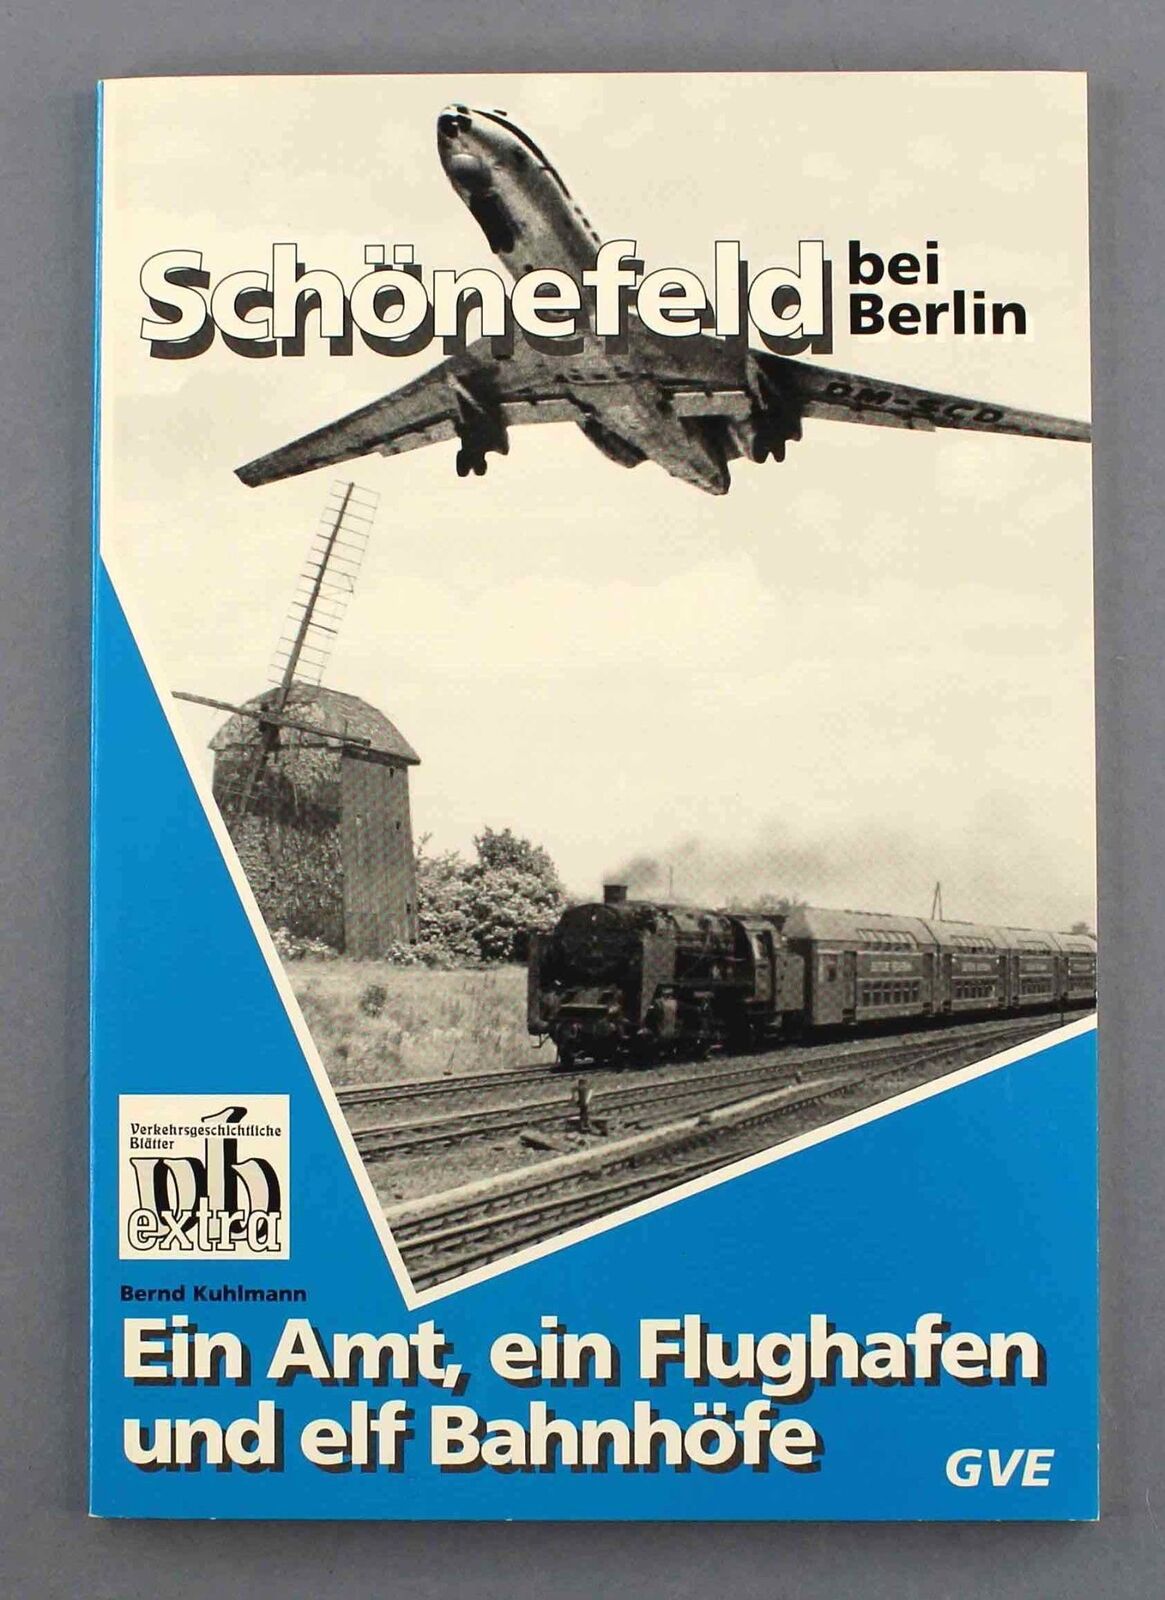 BERLIN SCHONEFELD AIRPORT & 11 TRAIN STATIONS BOOK EAST GERMANY DDR